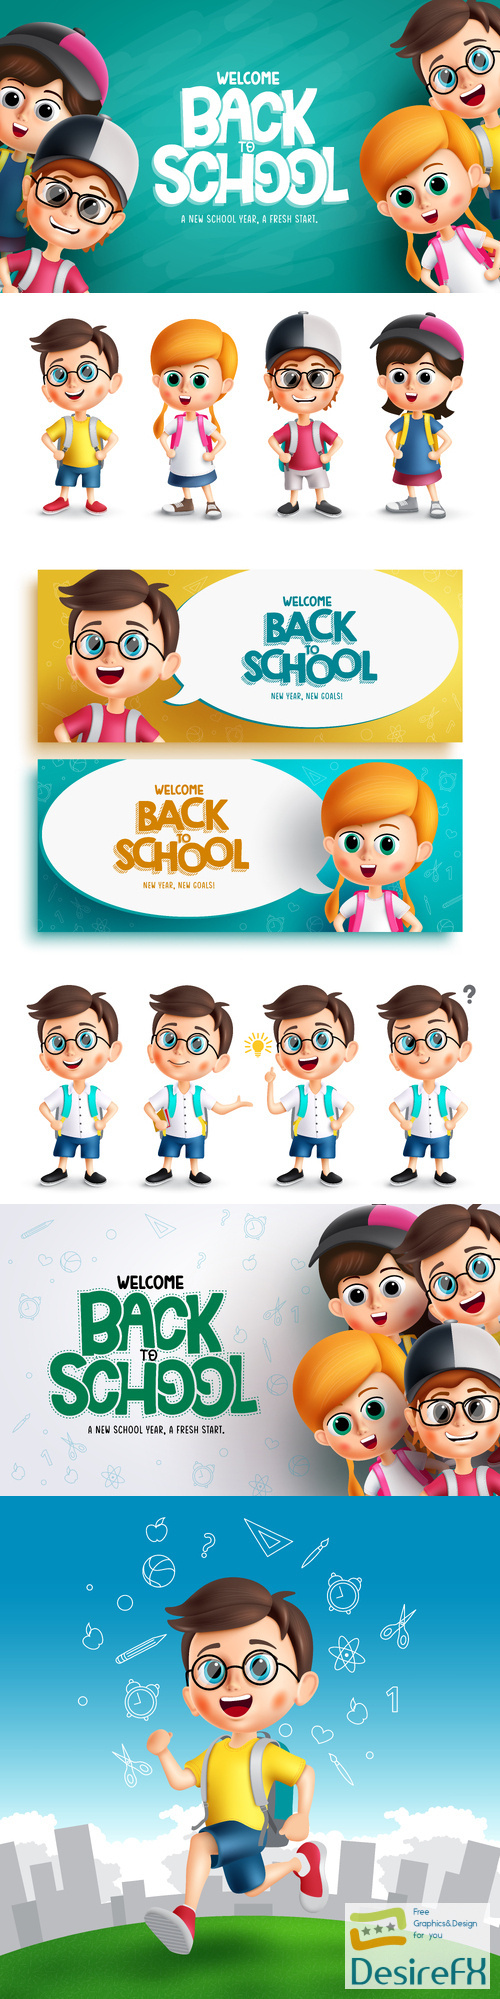 Vector back to school, school text with student characters in chalkboard element